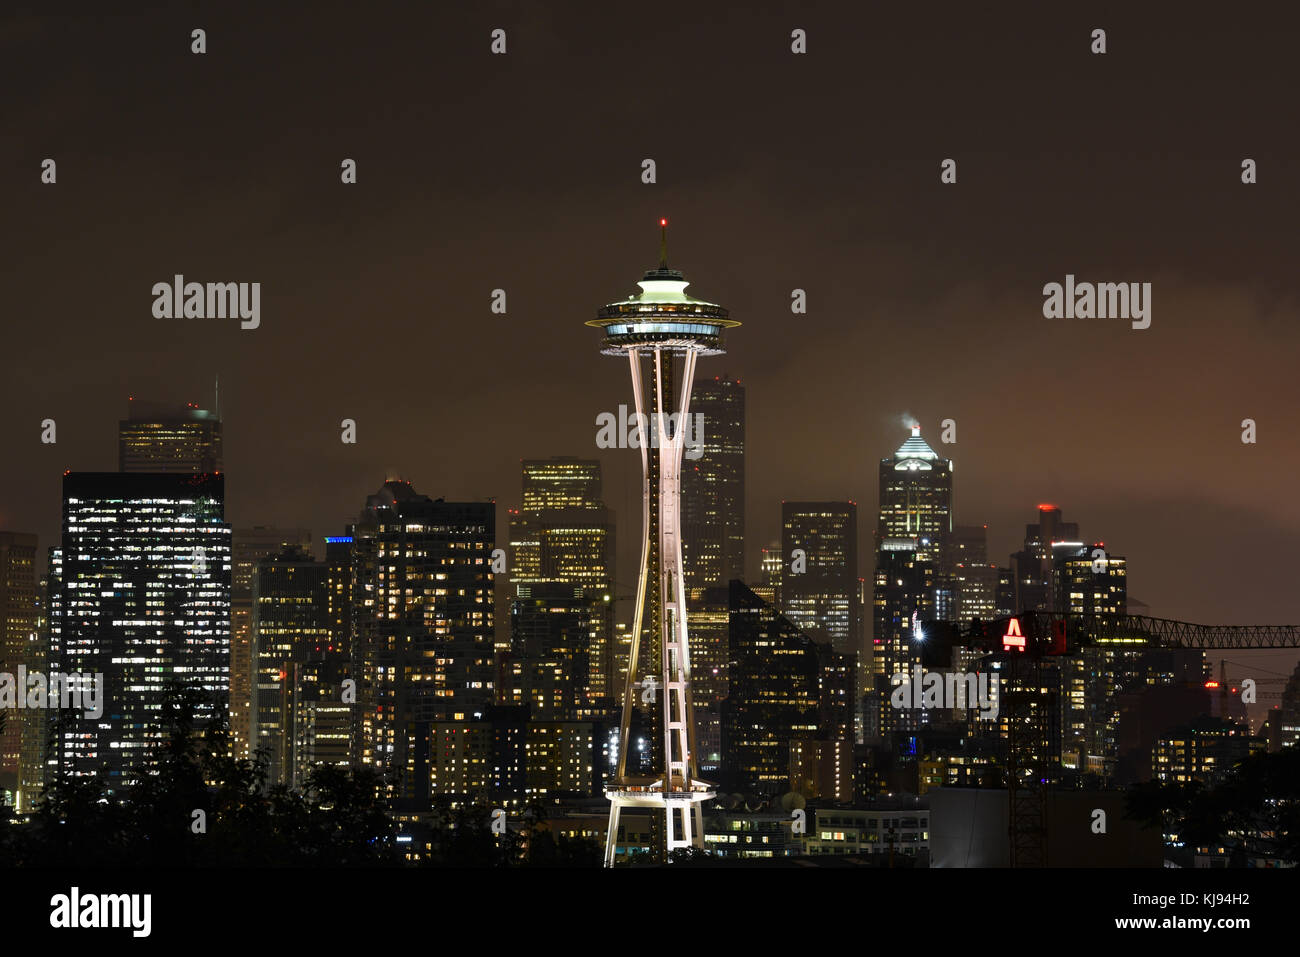 Evening dusk city scape of Seattle skyline Space Needle at night with lights Stock Photo